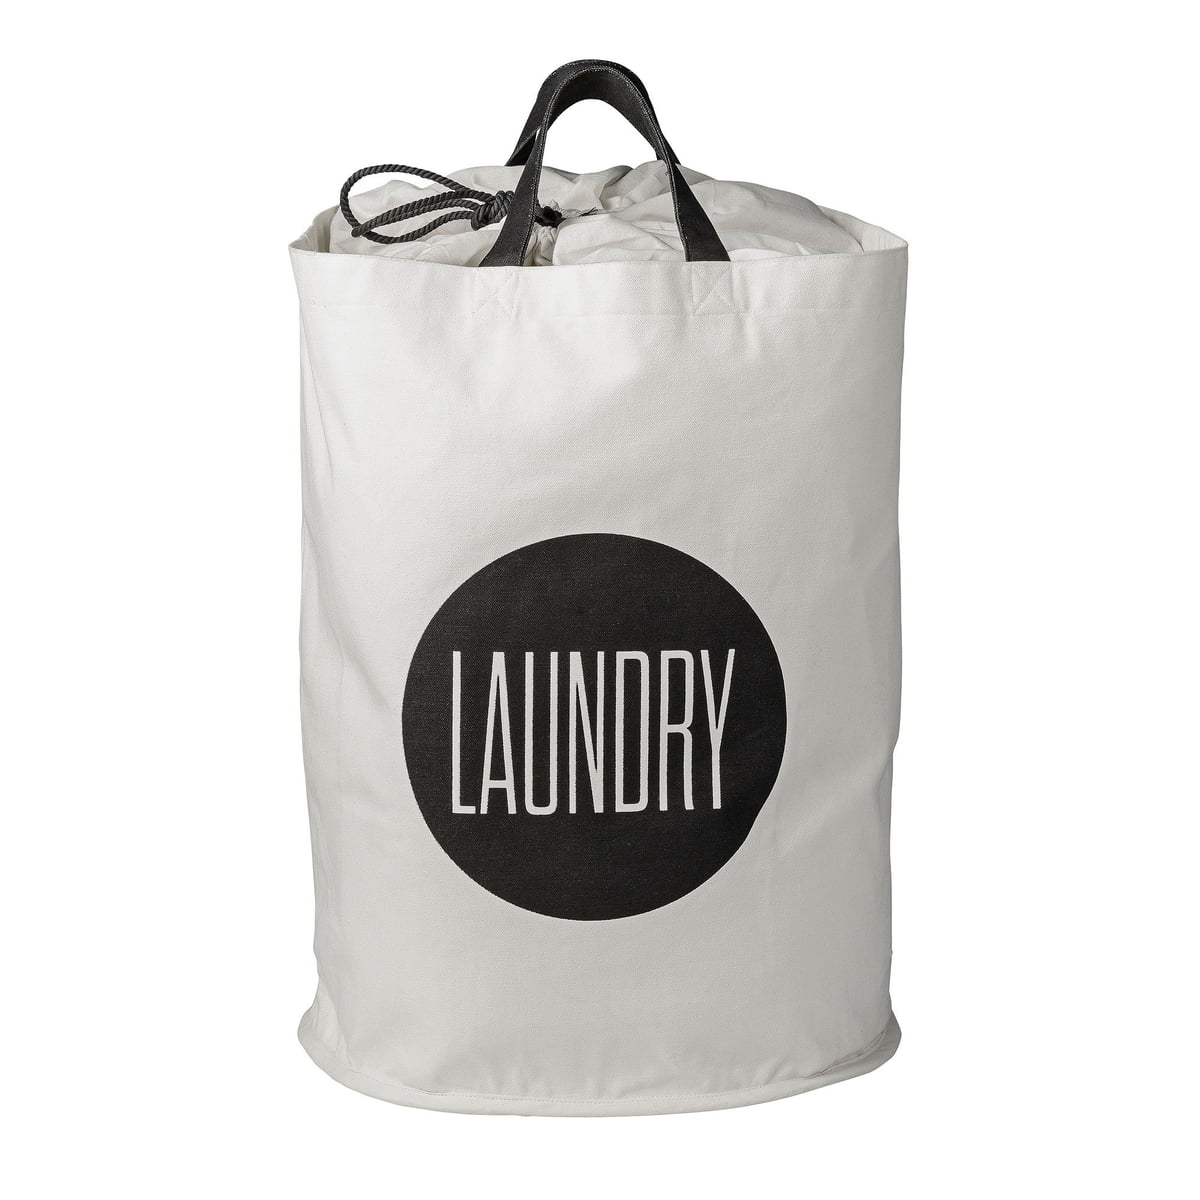 Laundry Bags - Ramesh Exports